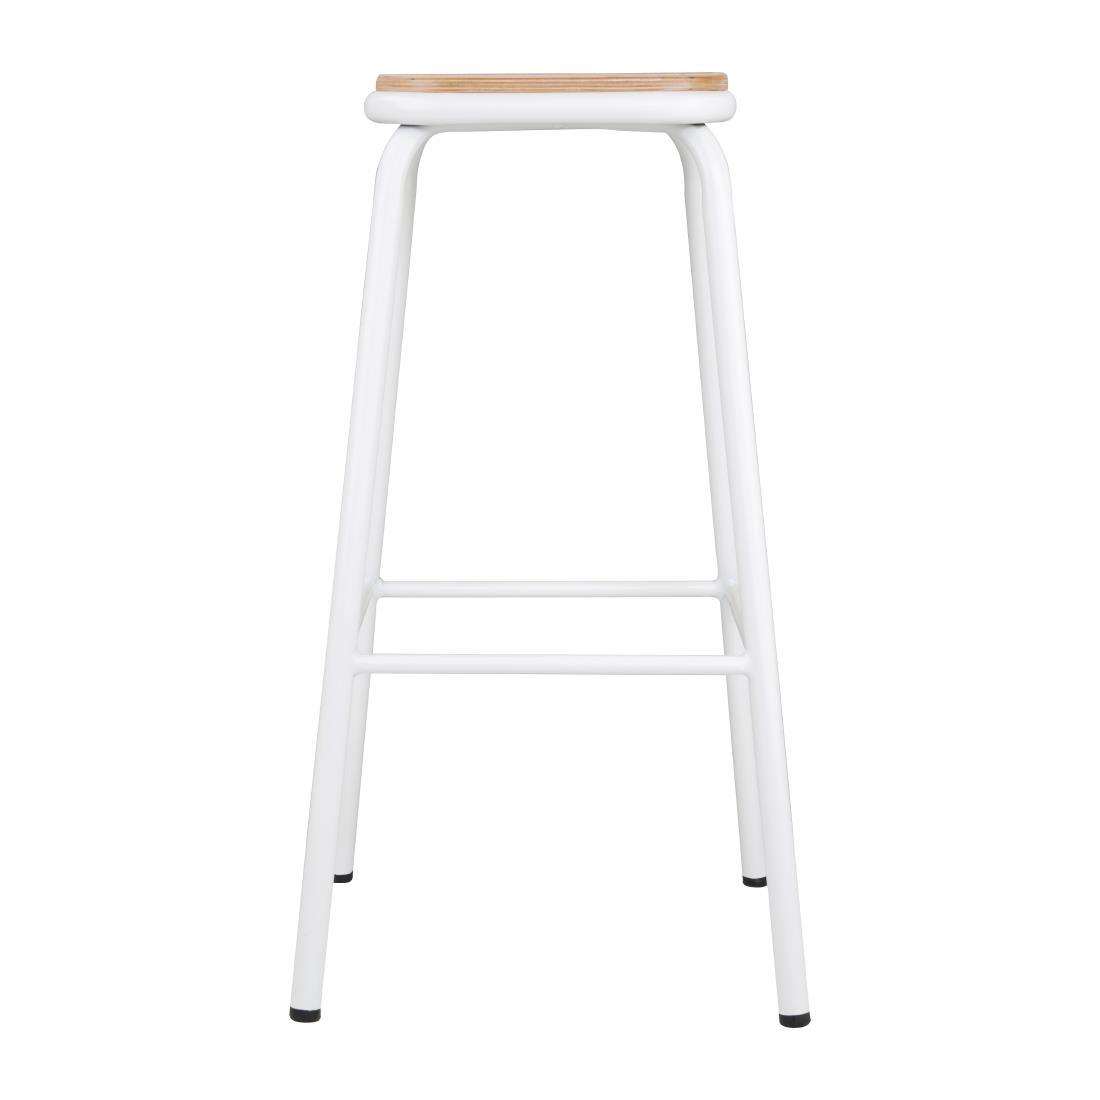 Bolero Cantina High Stools with Wooden Seat Pad White (Pack of 4) - FB939  - 2